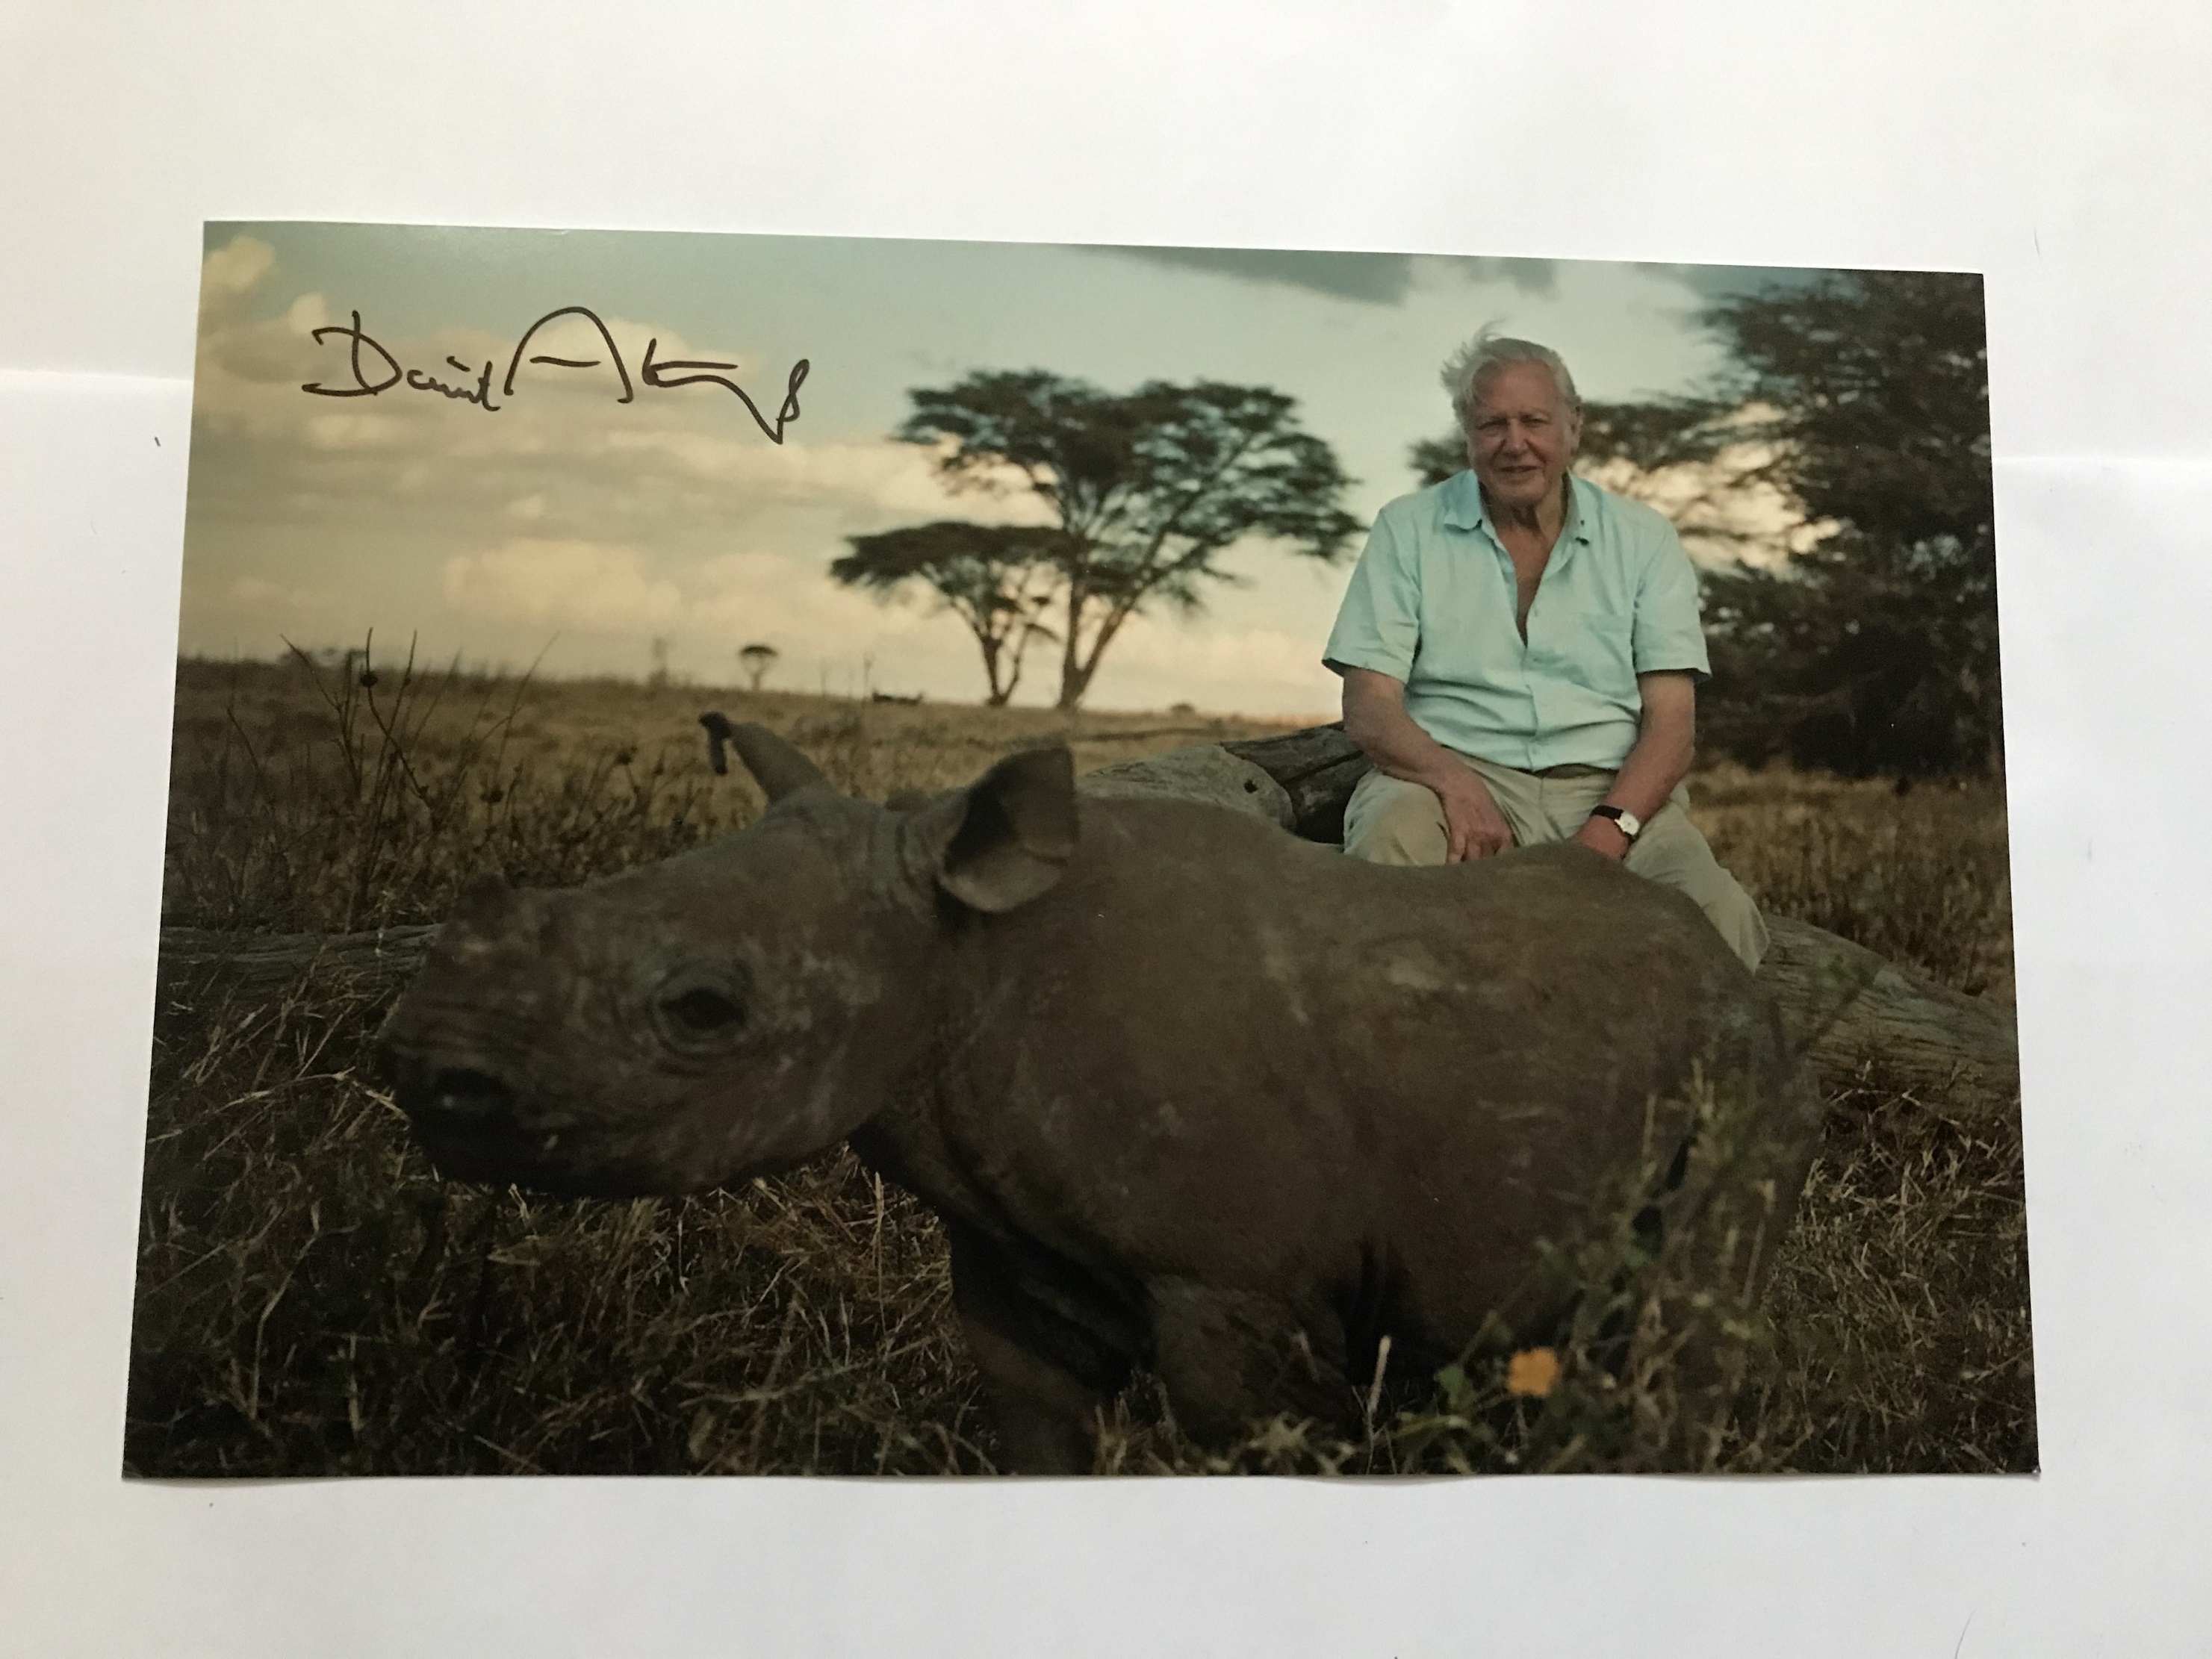 David Attenborough signed 12 x 8 inch colour photo with baby Rhino. Good condition. All signed